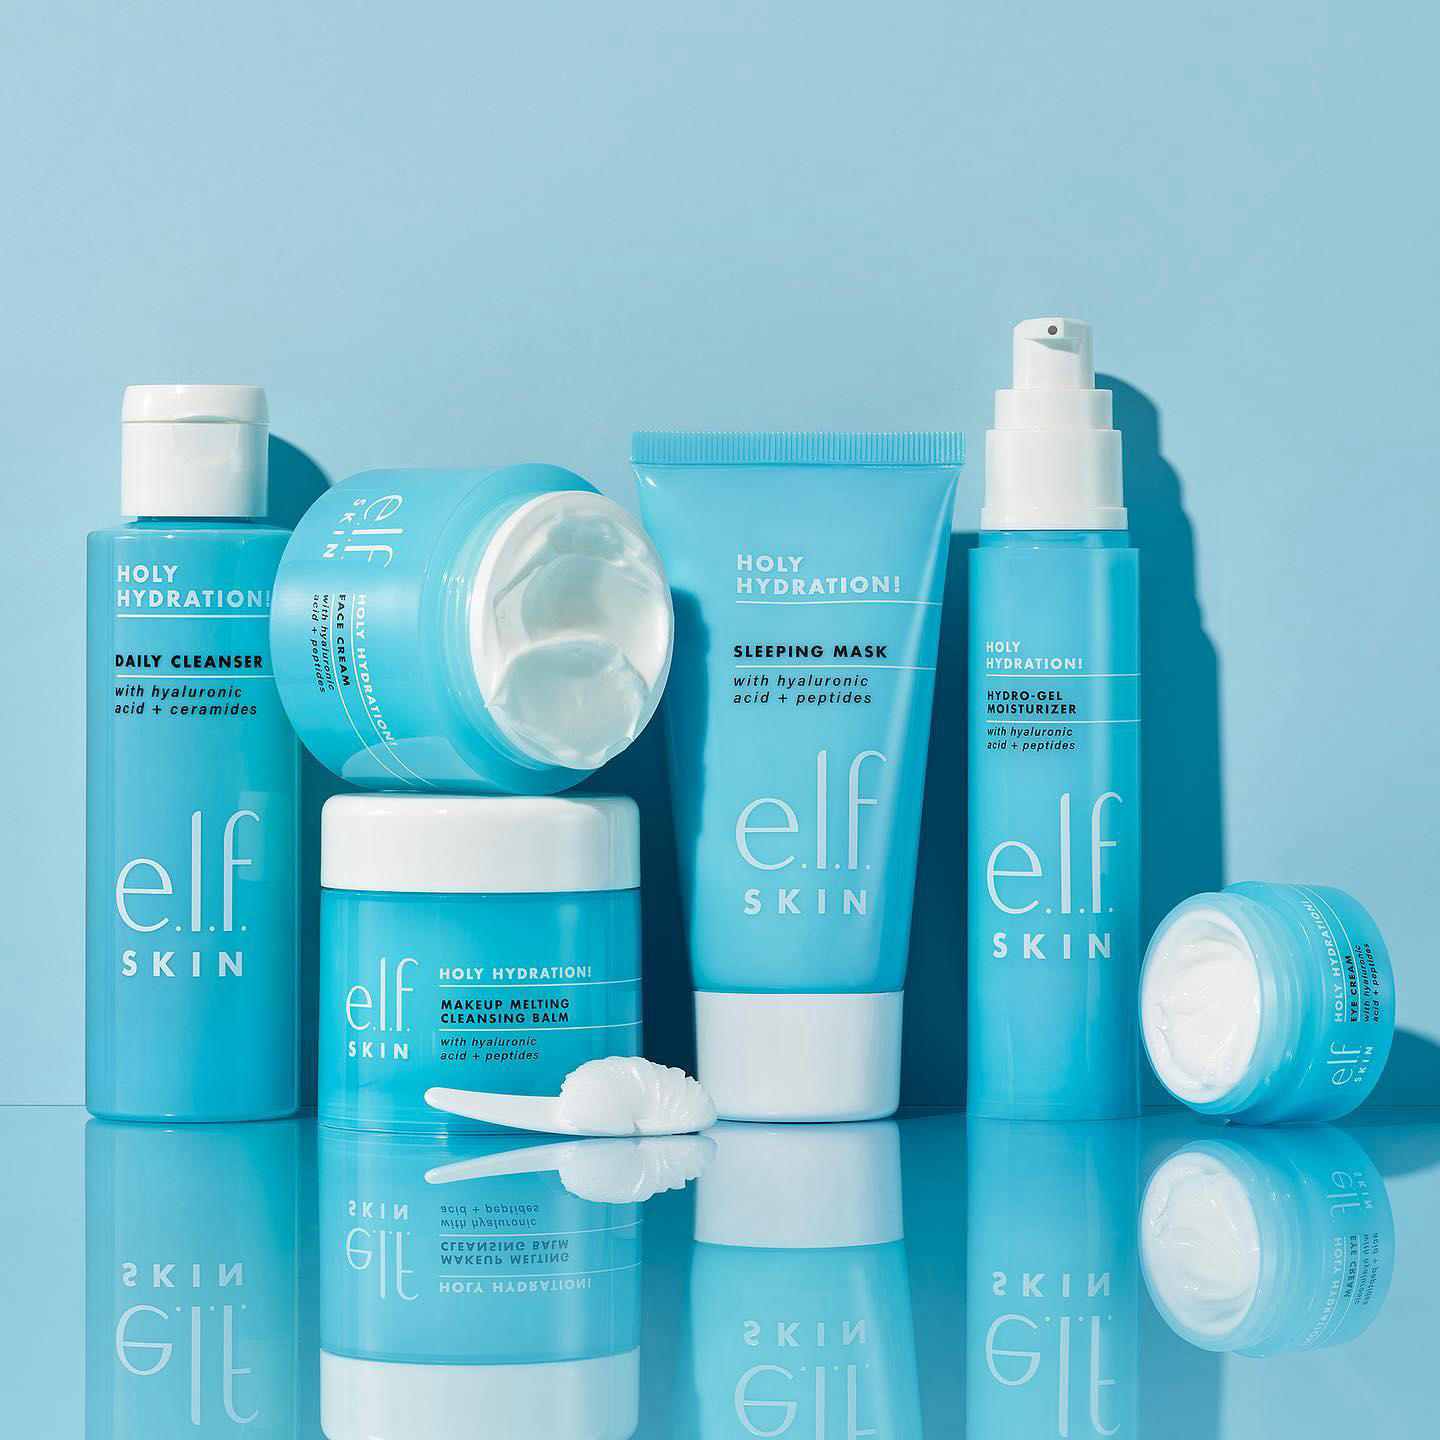 e.l.f. Cosmetics and Skincare - Your fave Holy Hydration